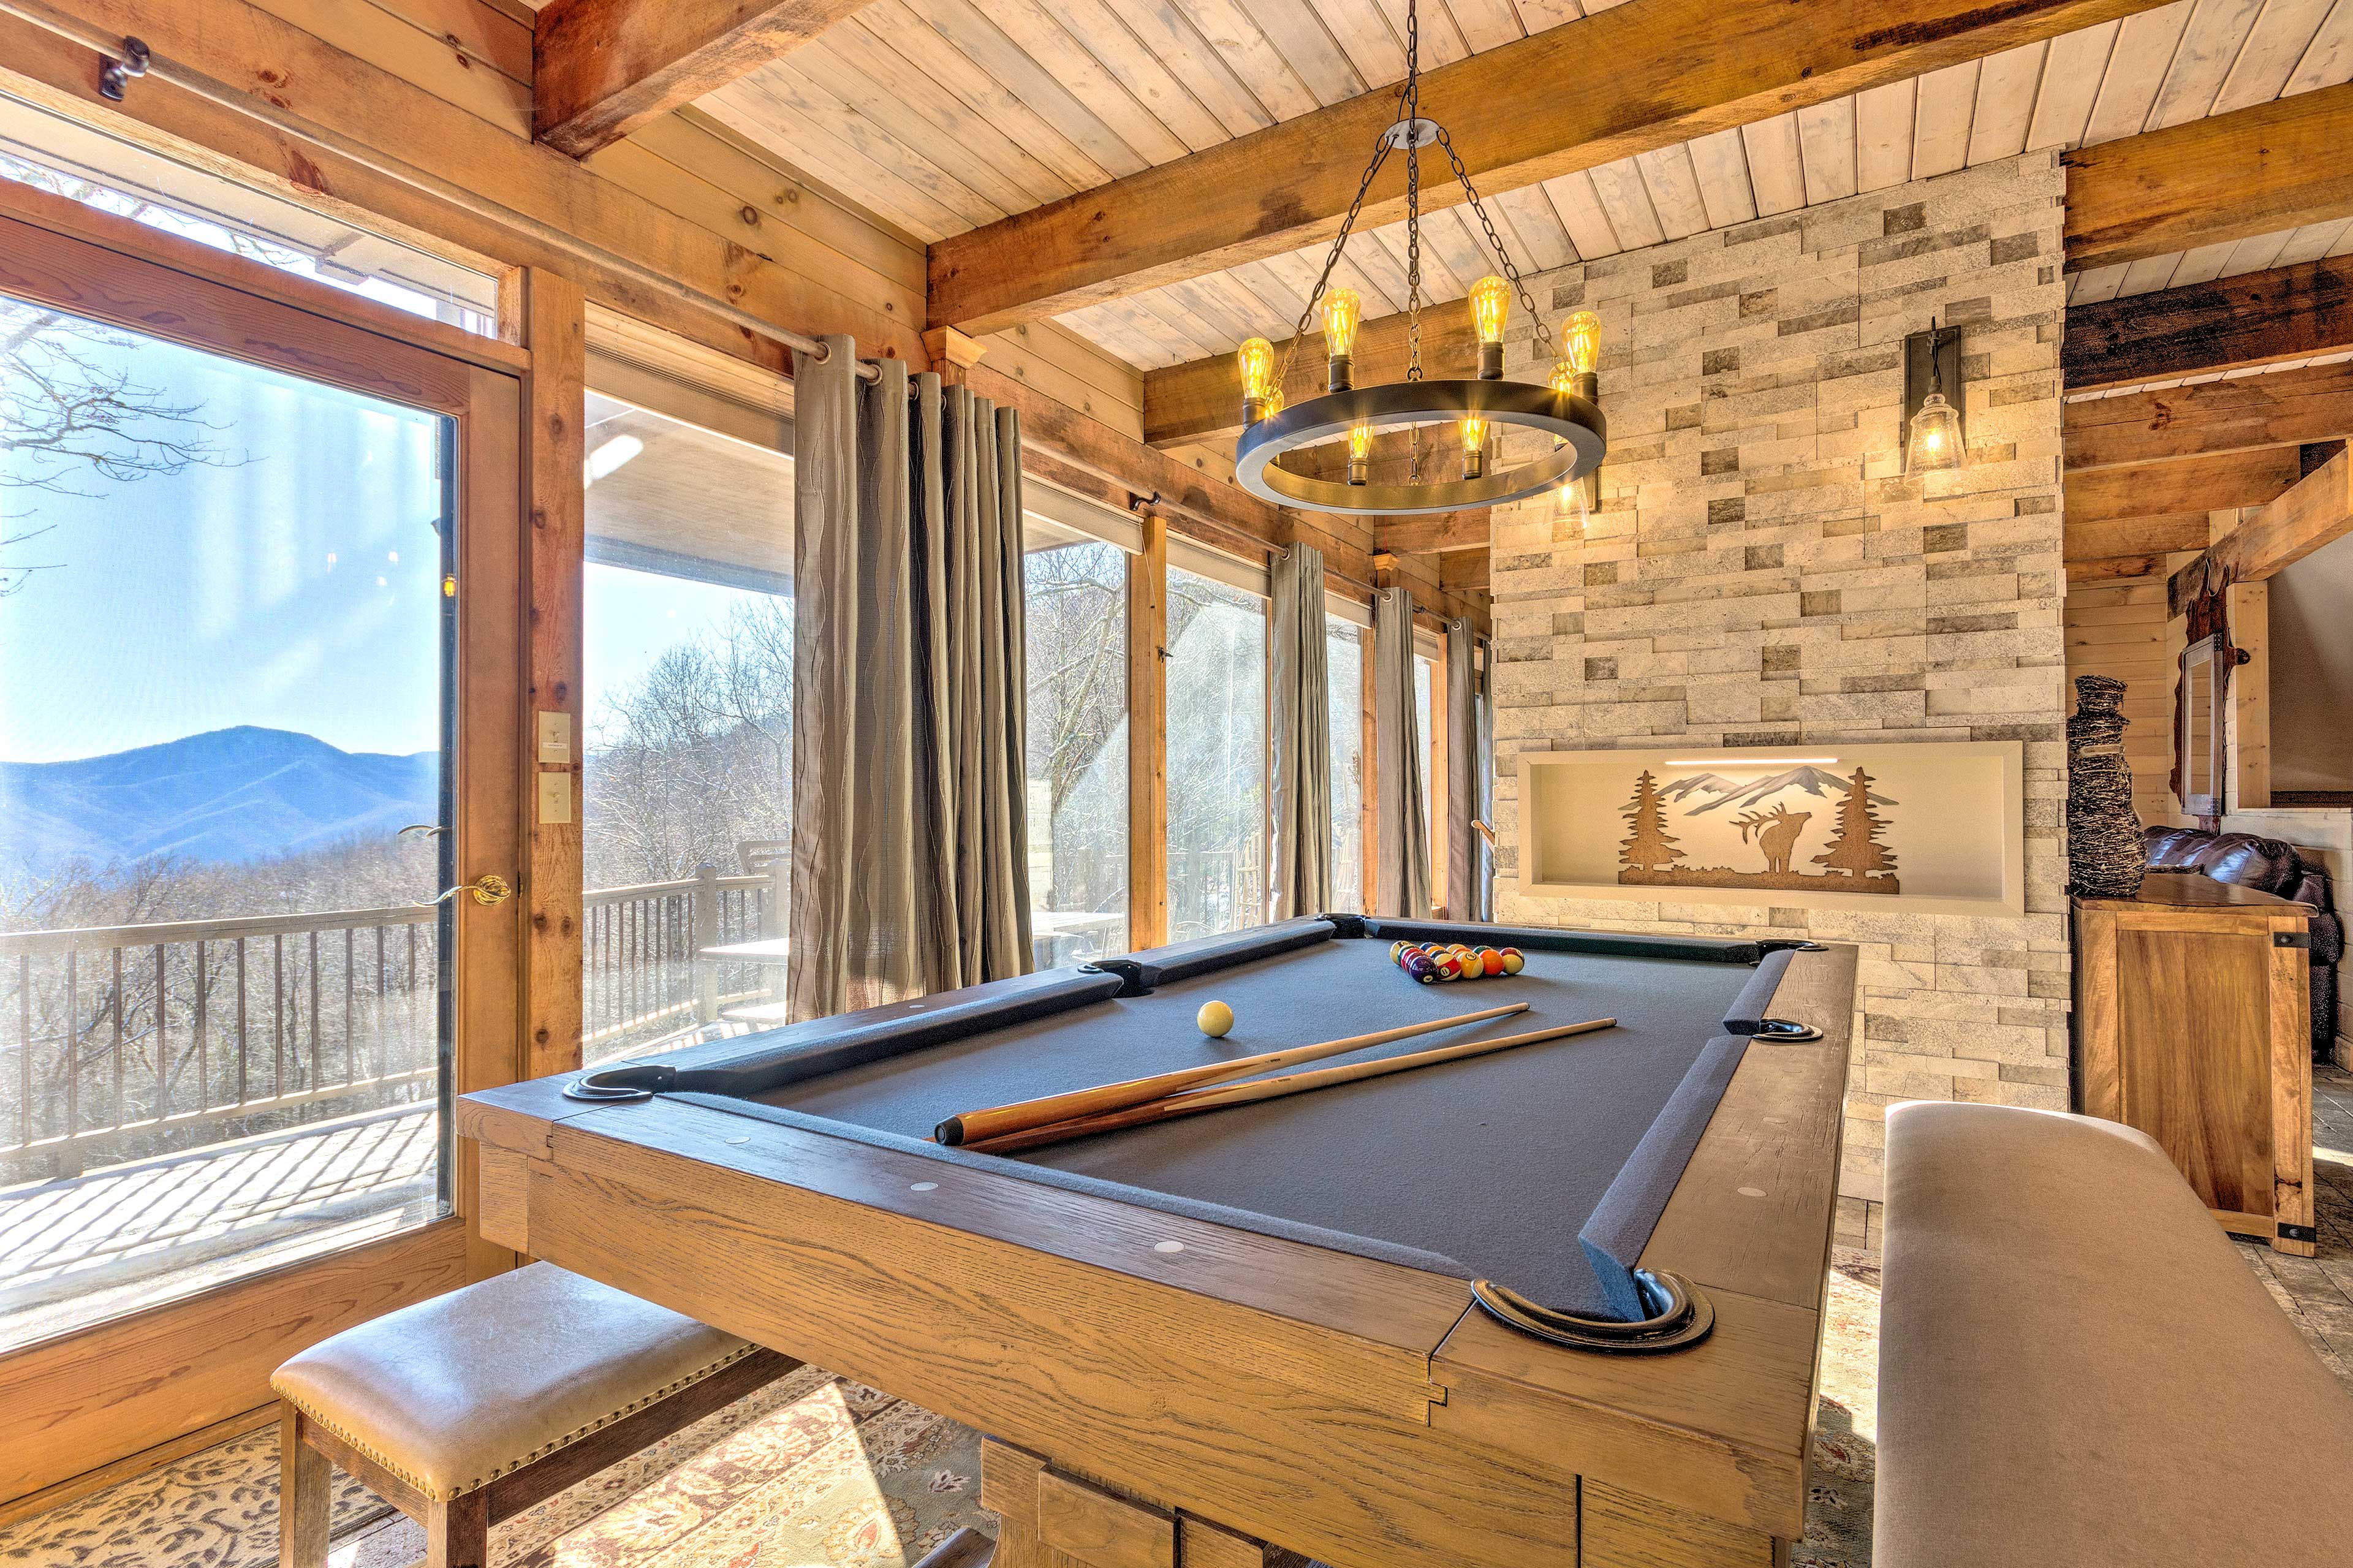 Game Area | Pool Table